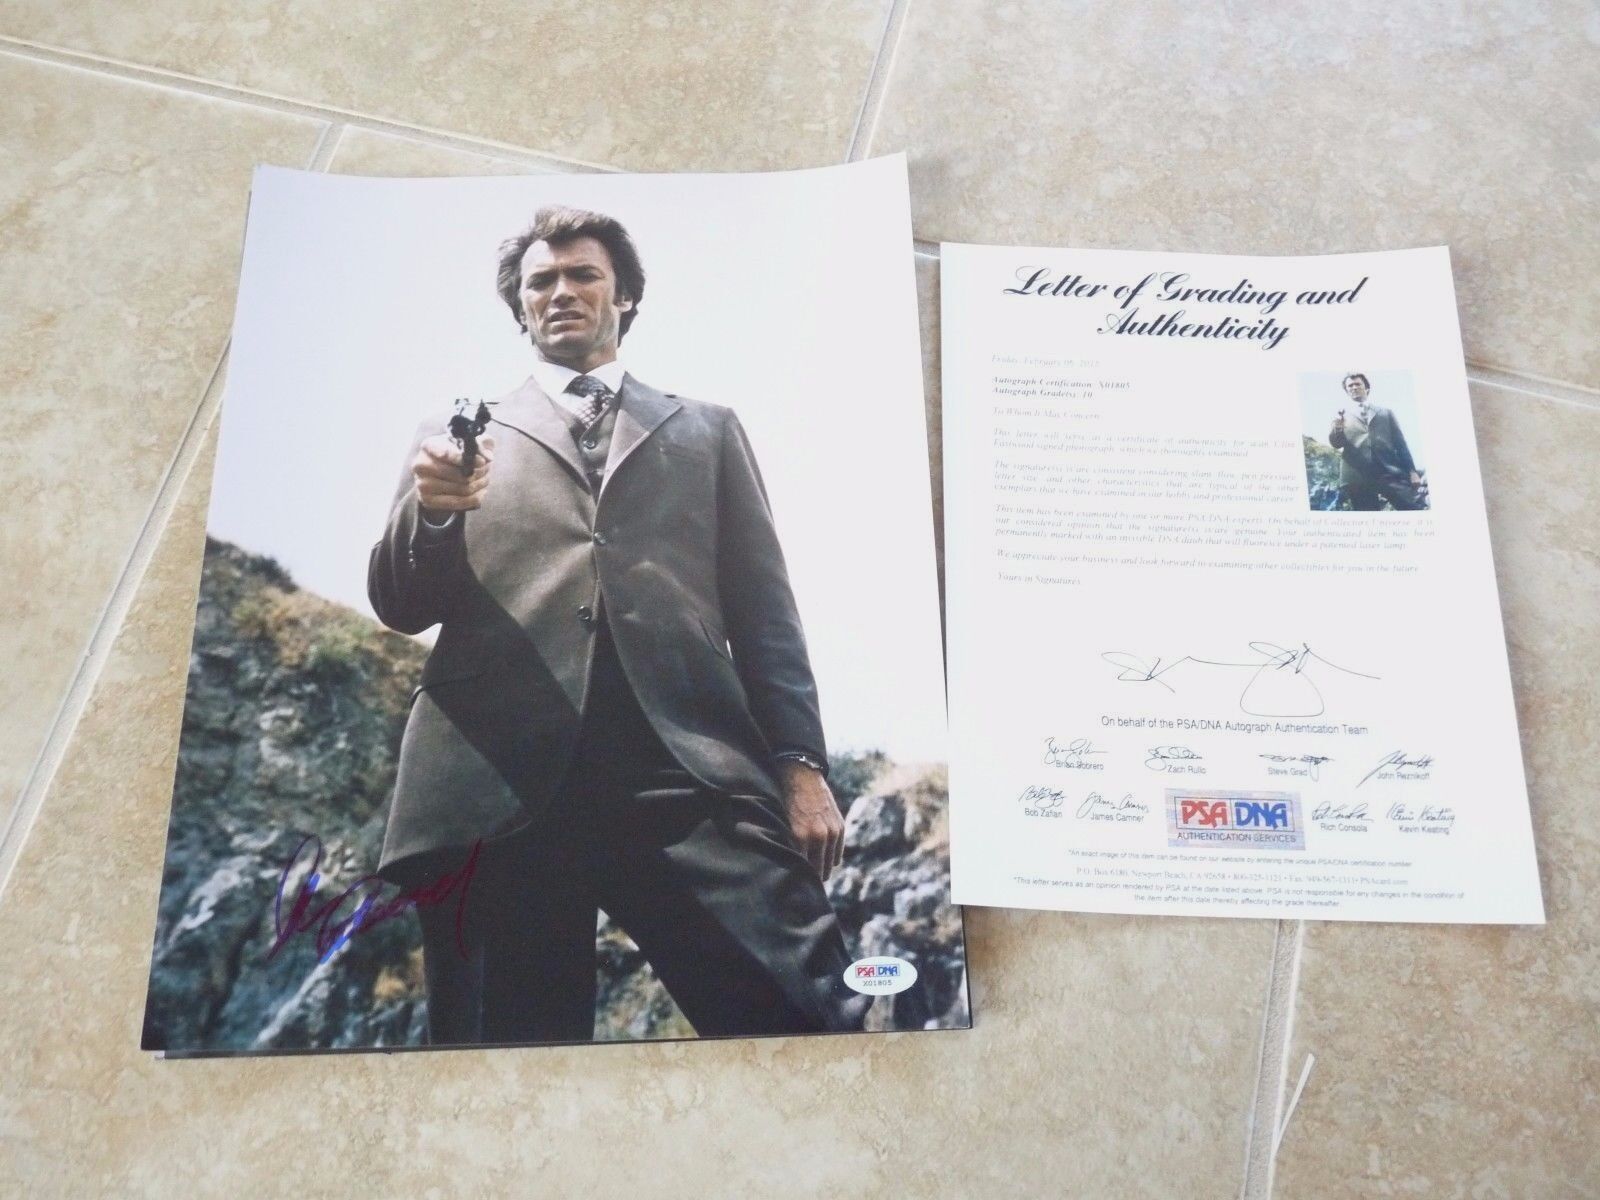 Clint Eastwood Dirty Harry Signed Autographed 11x14 Promo Photo Poster painting PSA Certified #7